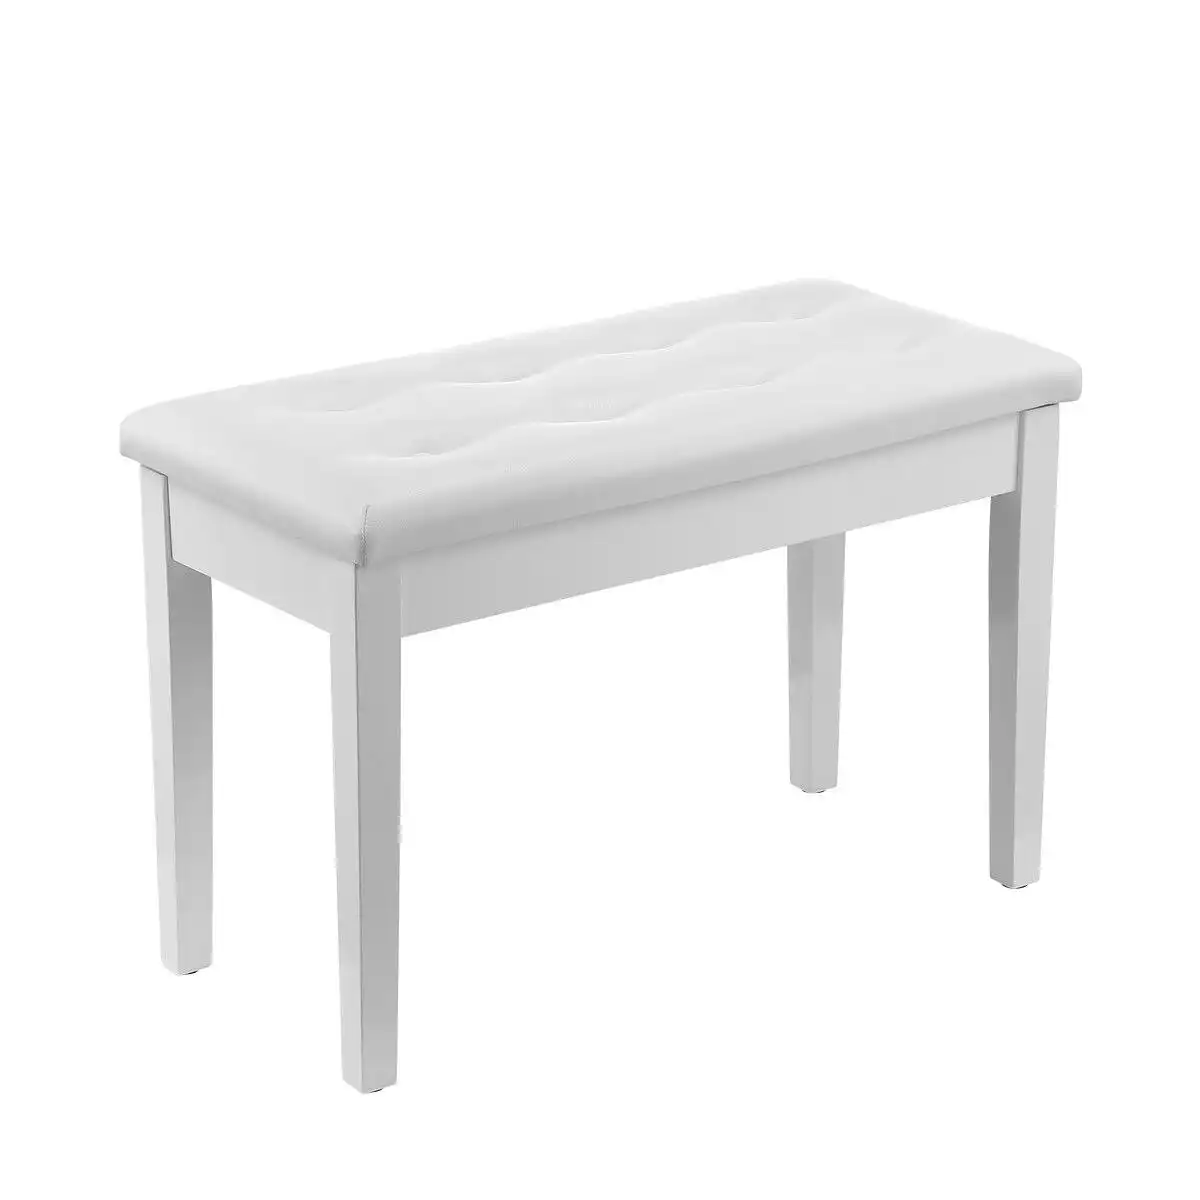 Melodic  Piano Stool Wooden Bench Chair Keyboard Seat with Storage White